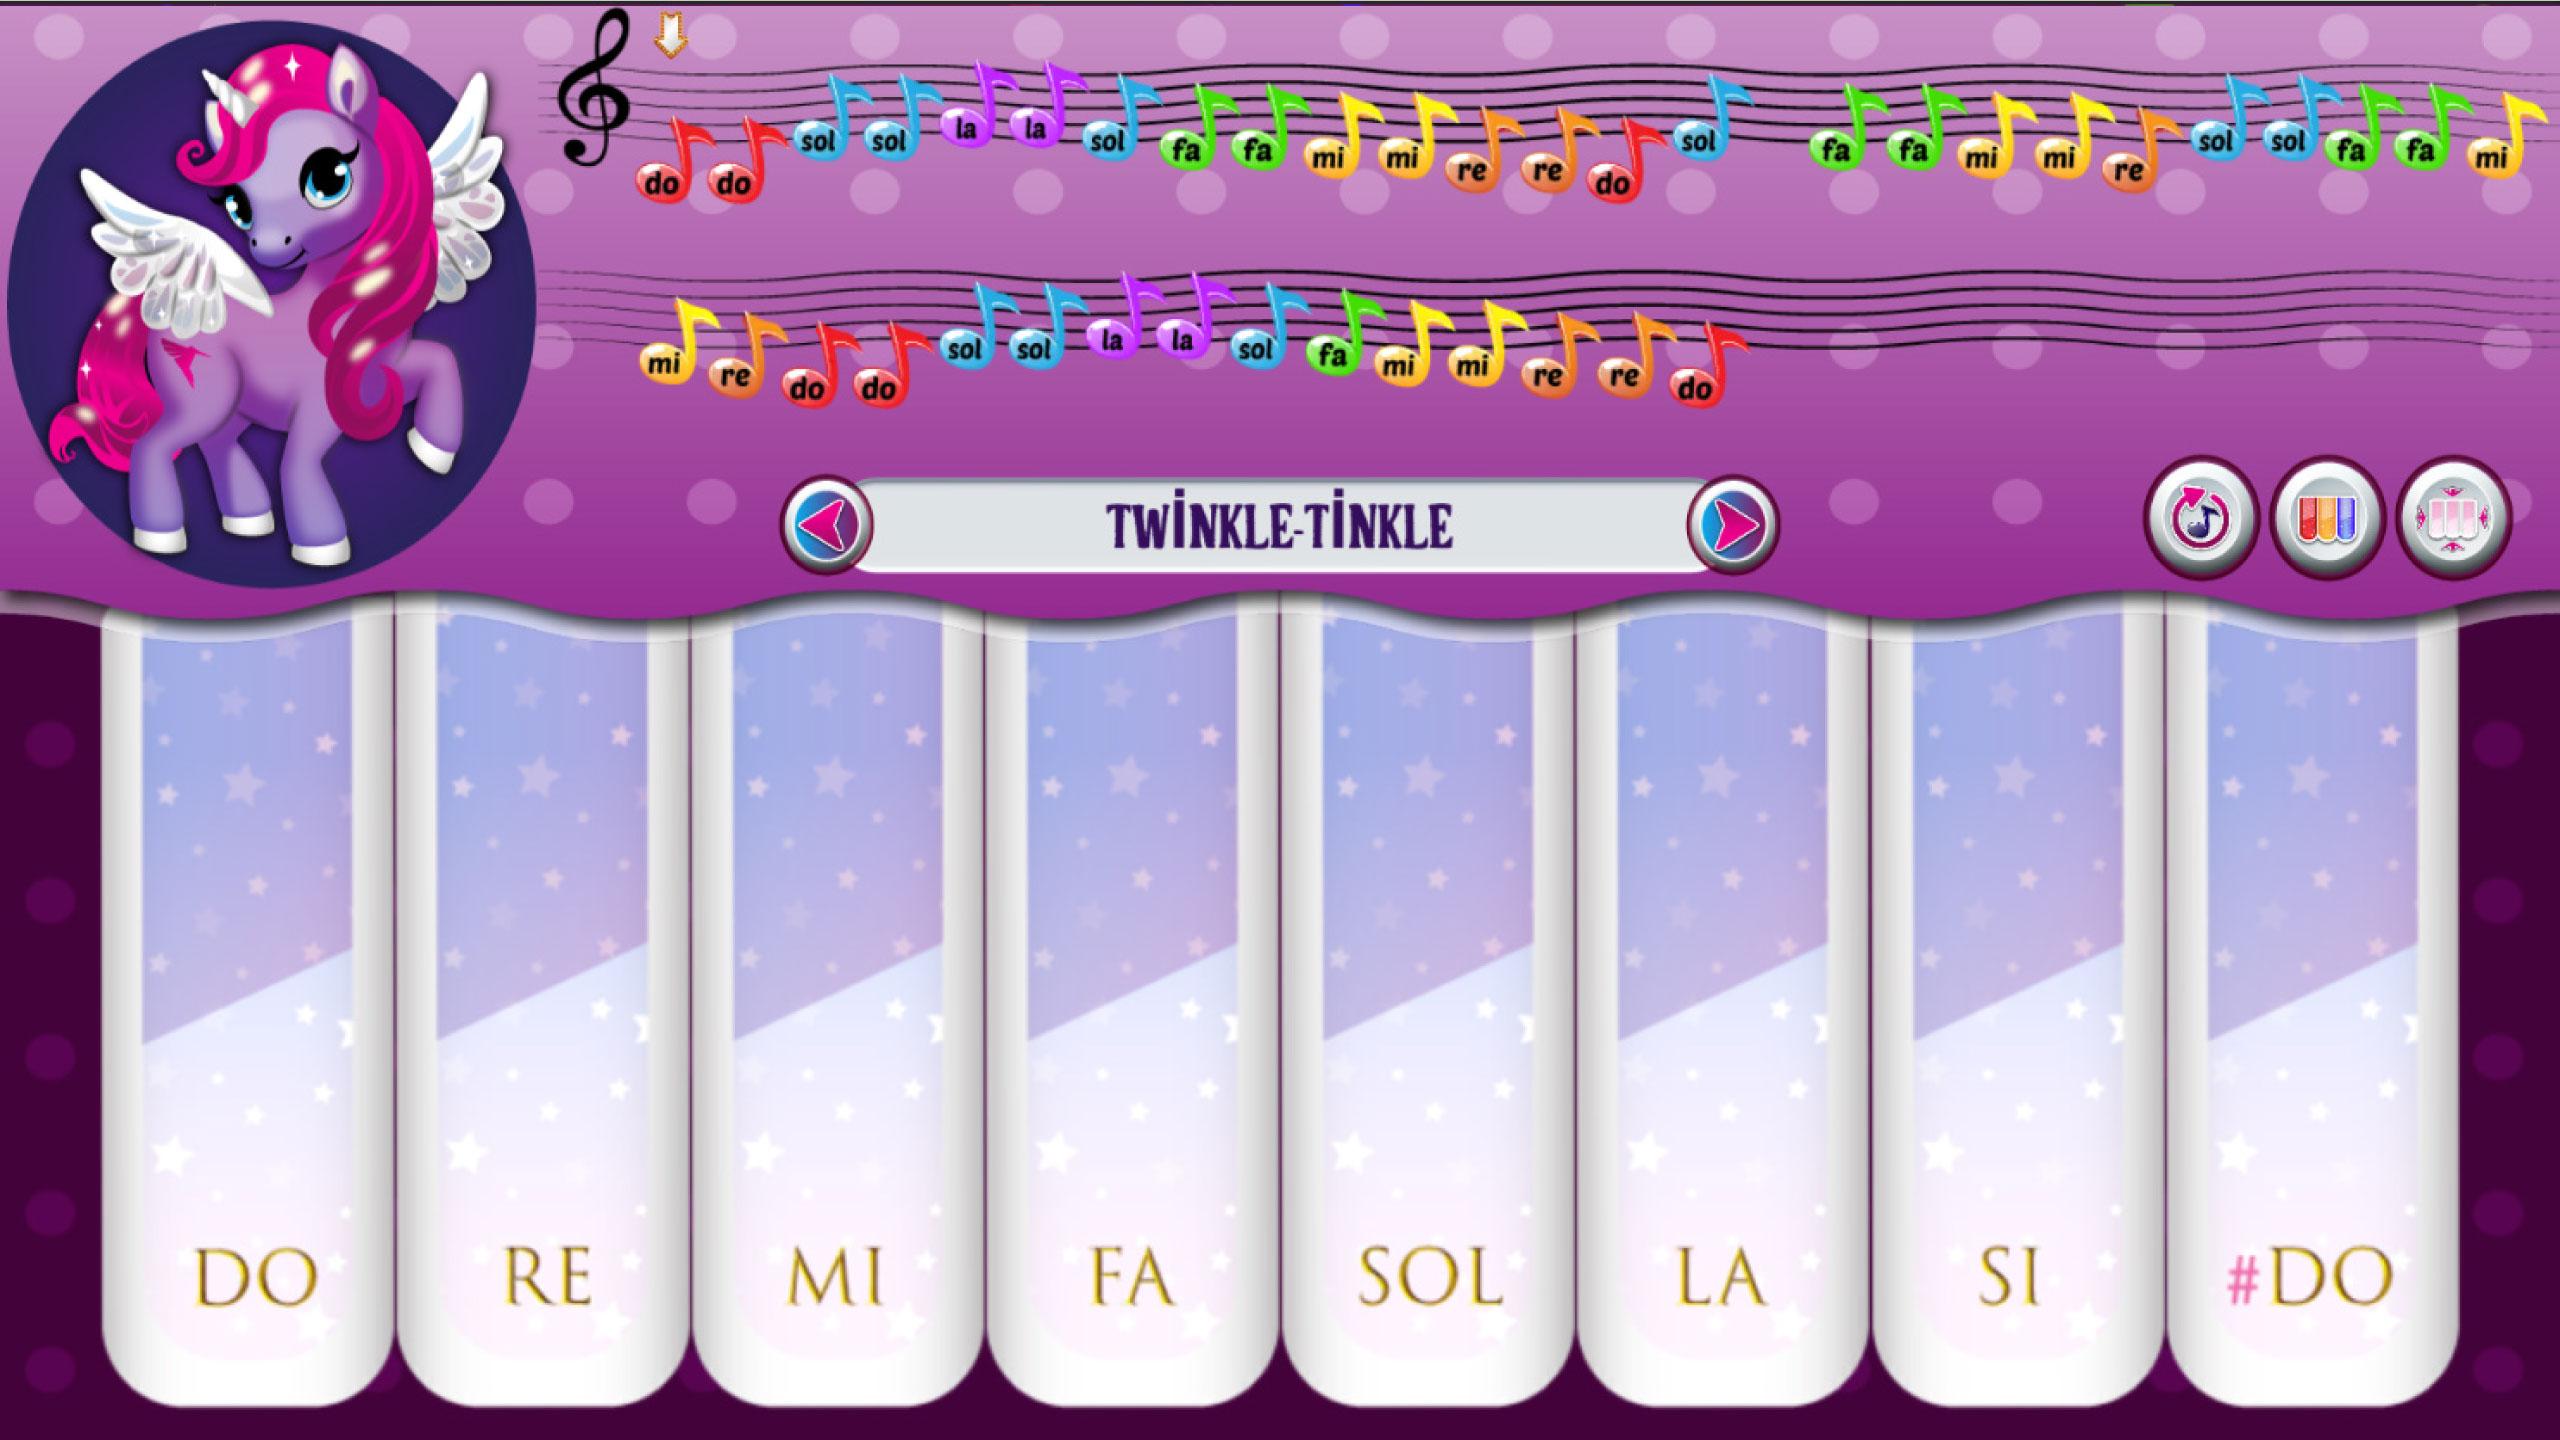 My Colorful Litle Pony Instrument - Piano 2.0 Screenshot 8